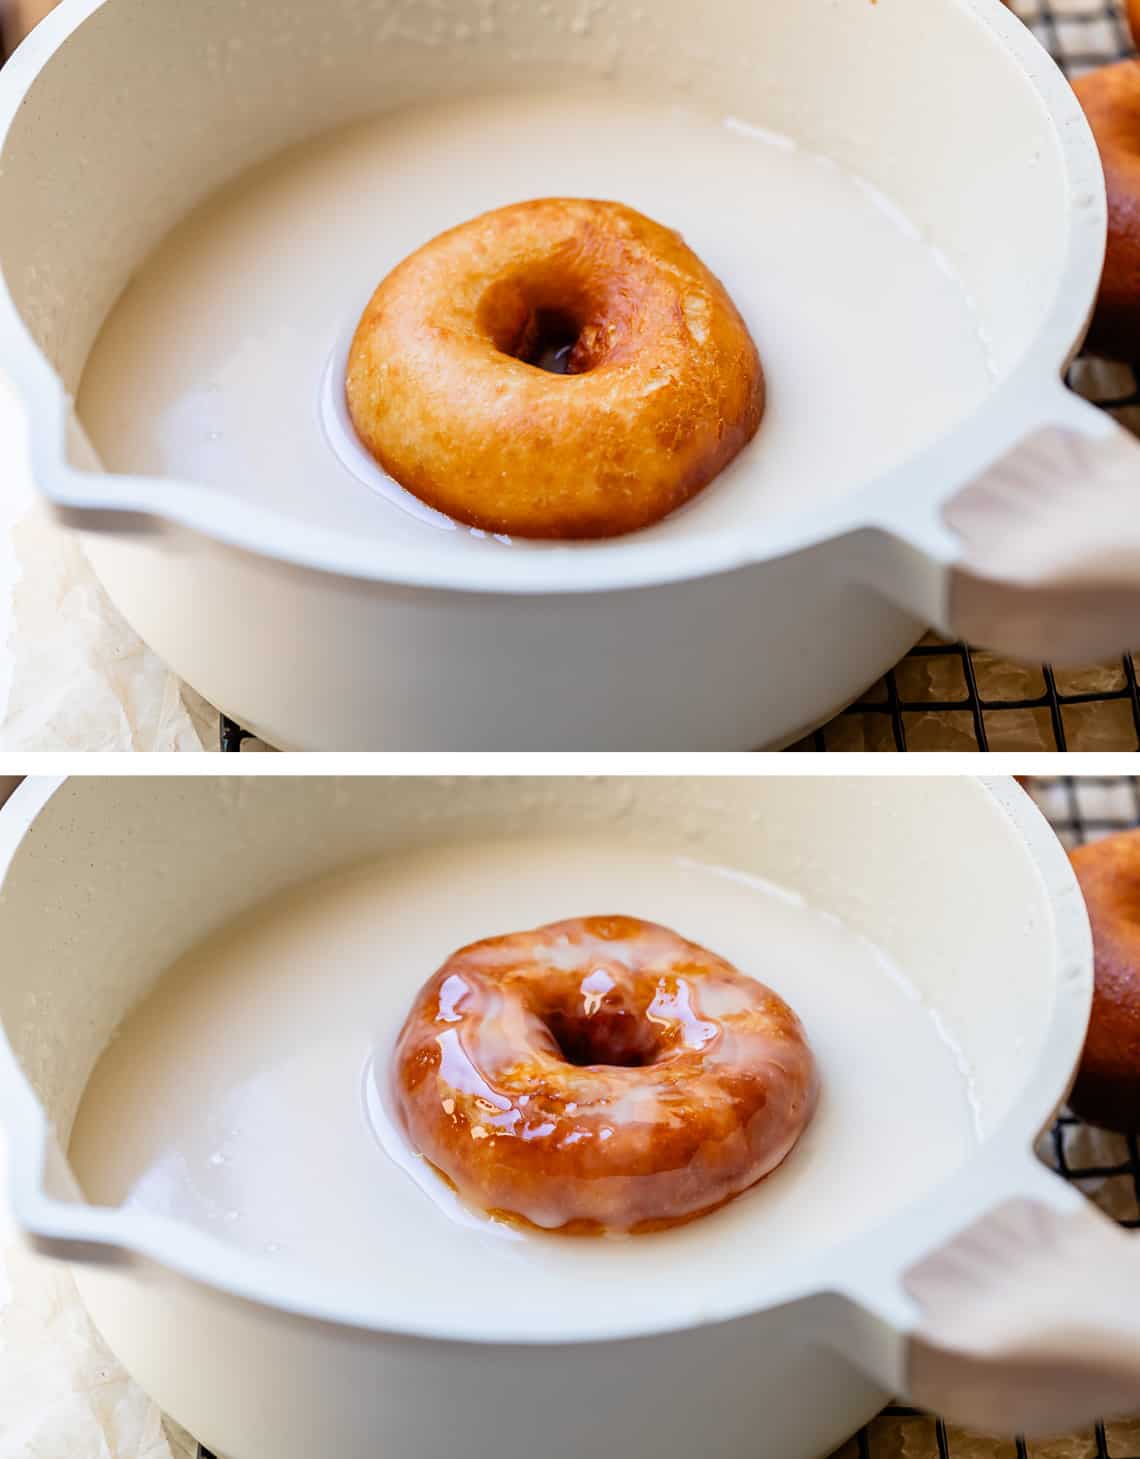 top donut sitting in bowl of glaze to coat bottom, bottom donut flipped over to coat other side.